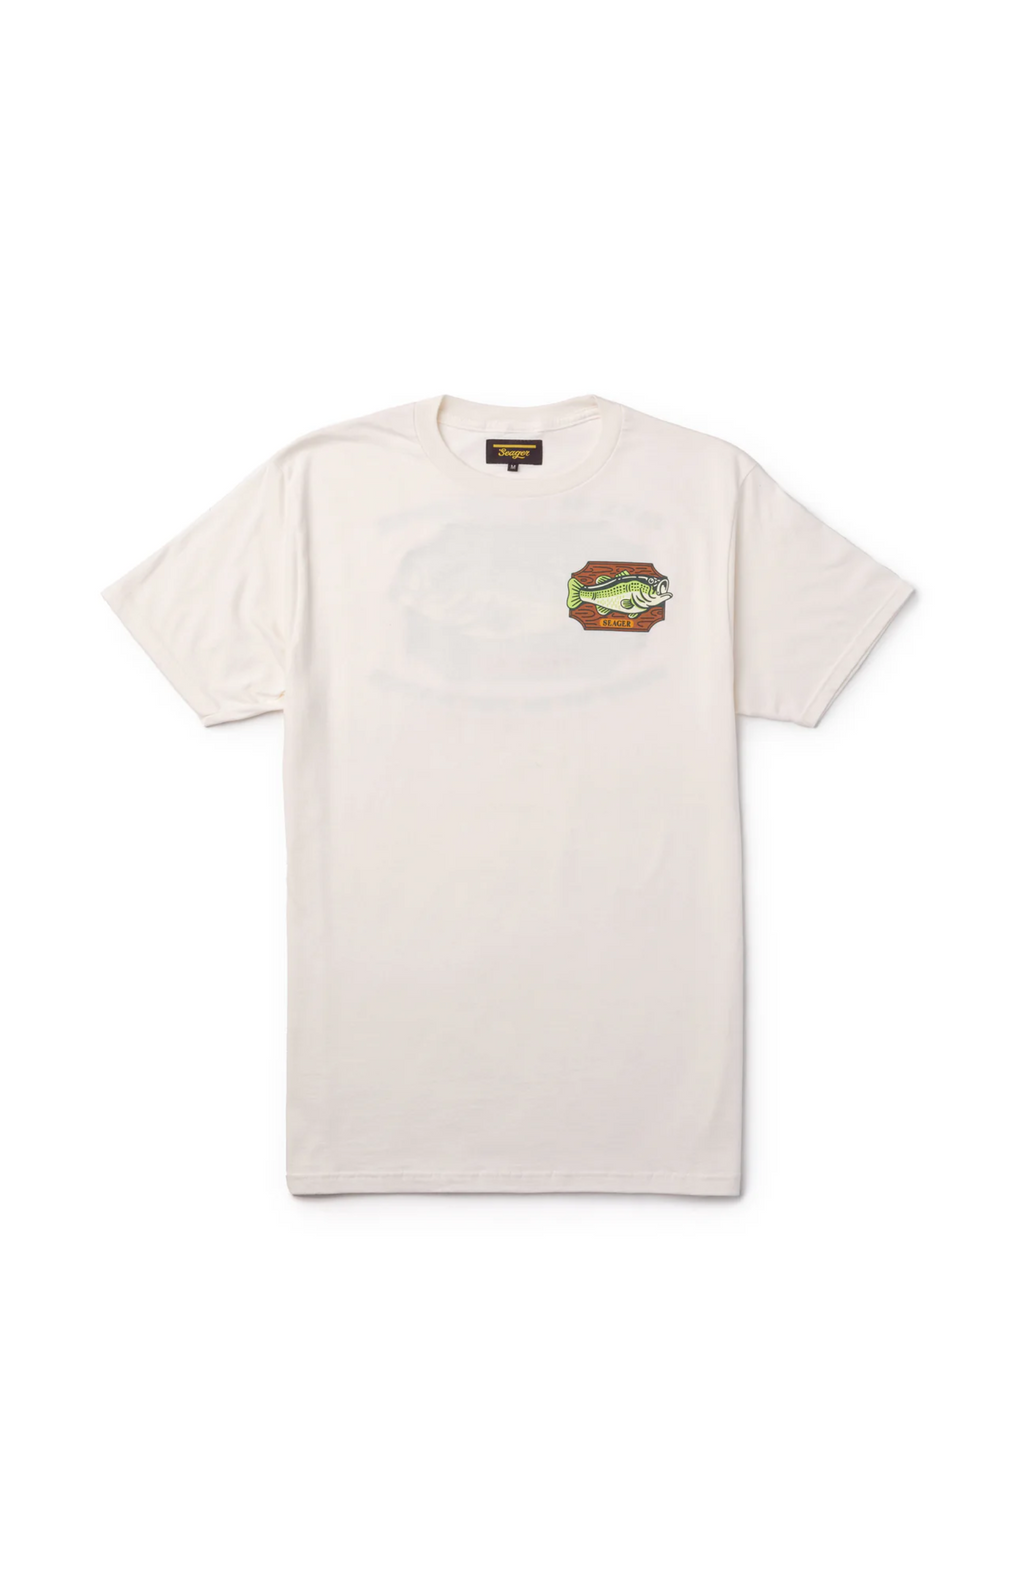 Seager - Billy Bass Tee